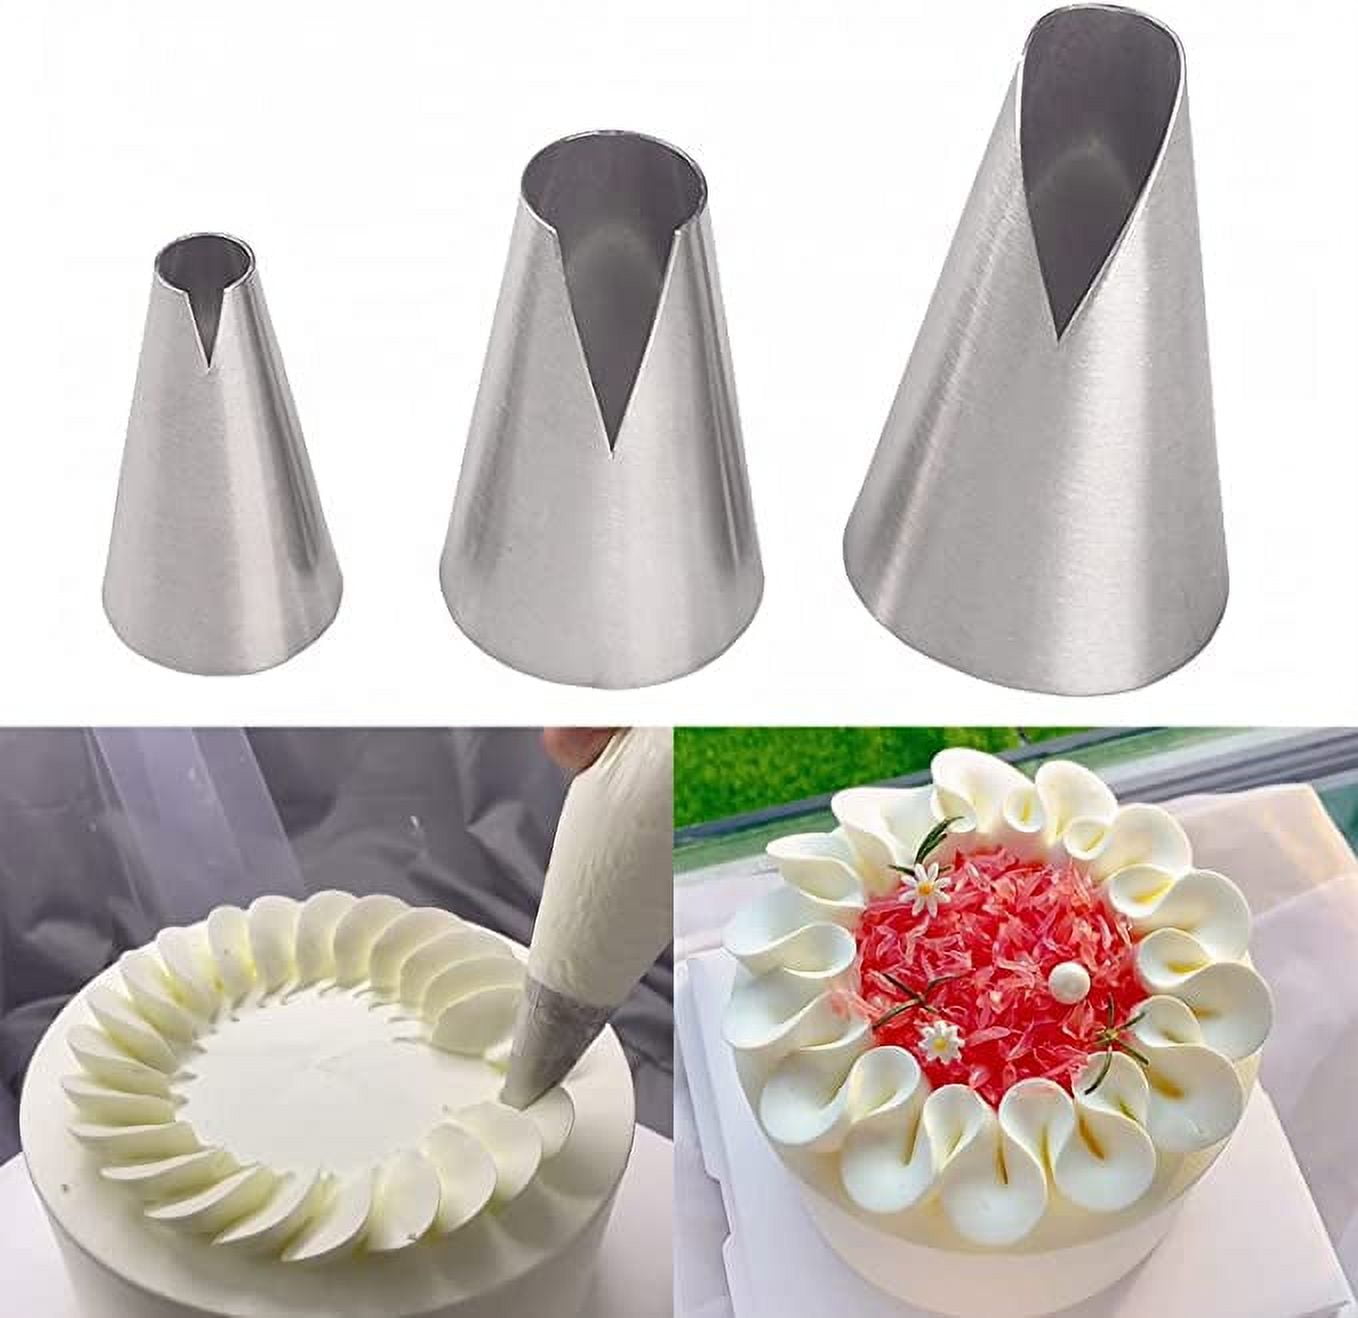 3 Pcs Russian Piping Tips Set,V-shaped Wave Cake Decorating Nozzles Tips  Piping Kit for Pastry Cupcakes Cakes Cookies Decorating Stainless Steel  Kitchen Gadgets - Walmart.com